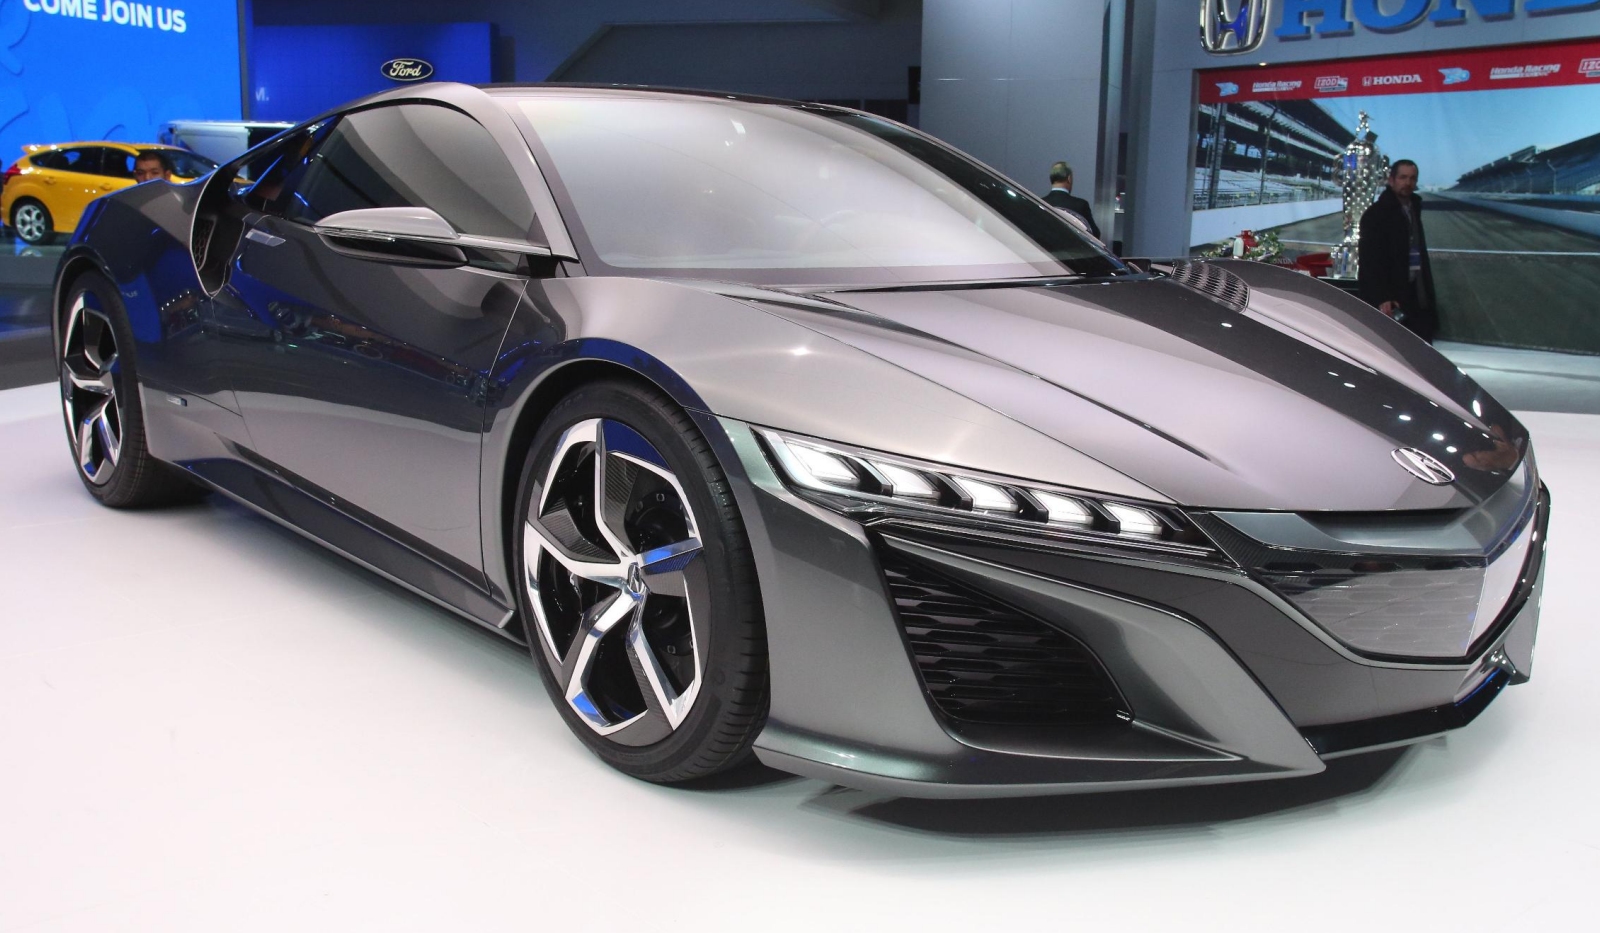 Acura Nsx Wallpaper S High Resolution Image For